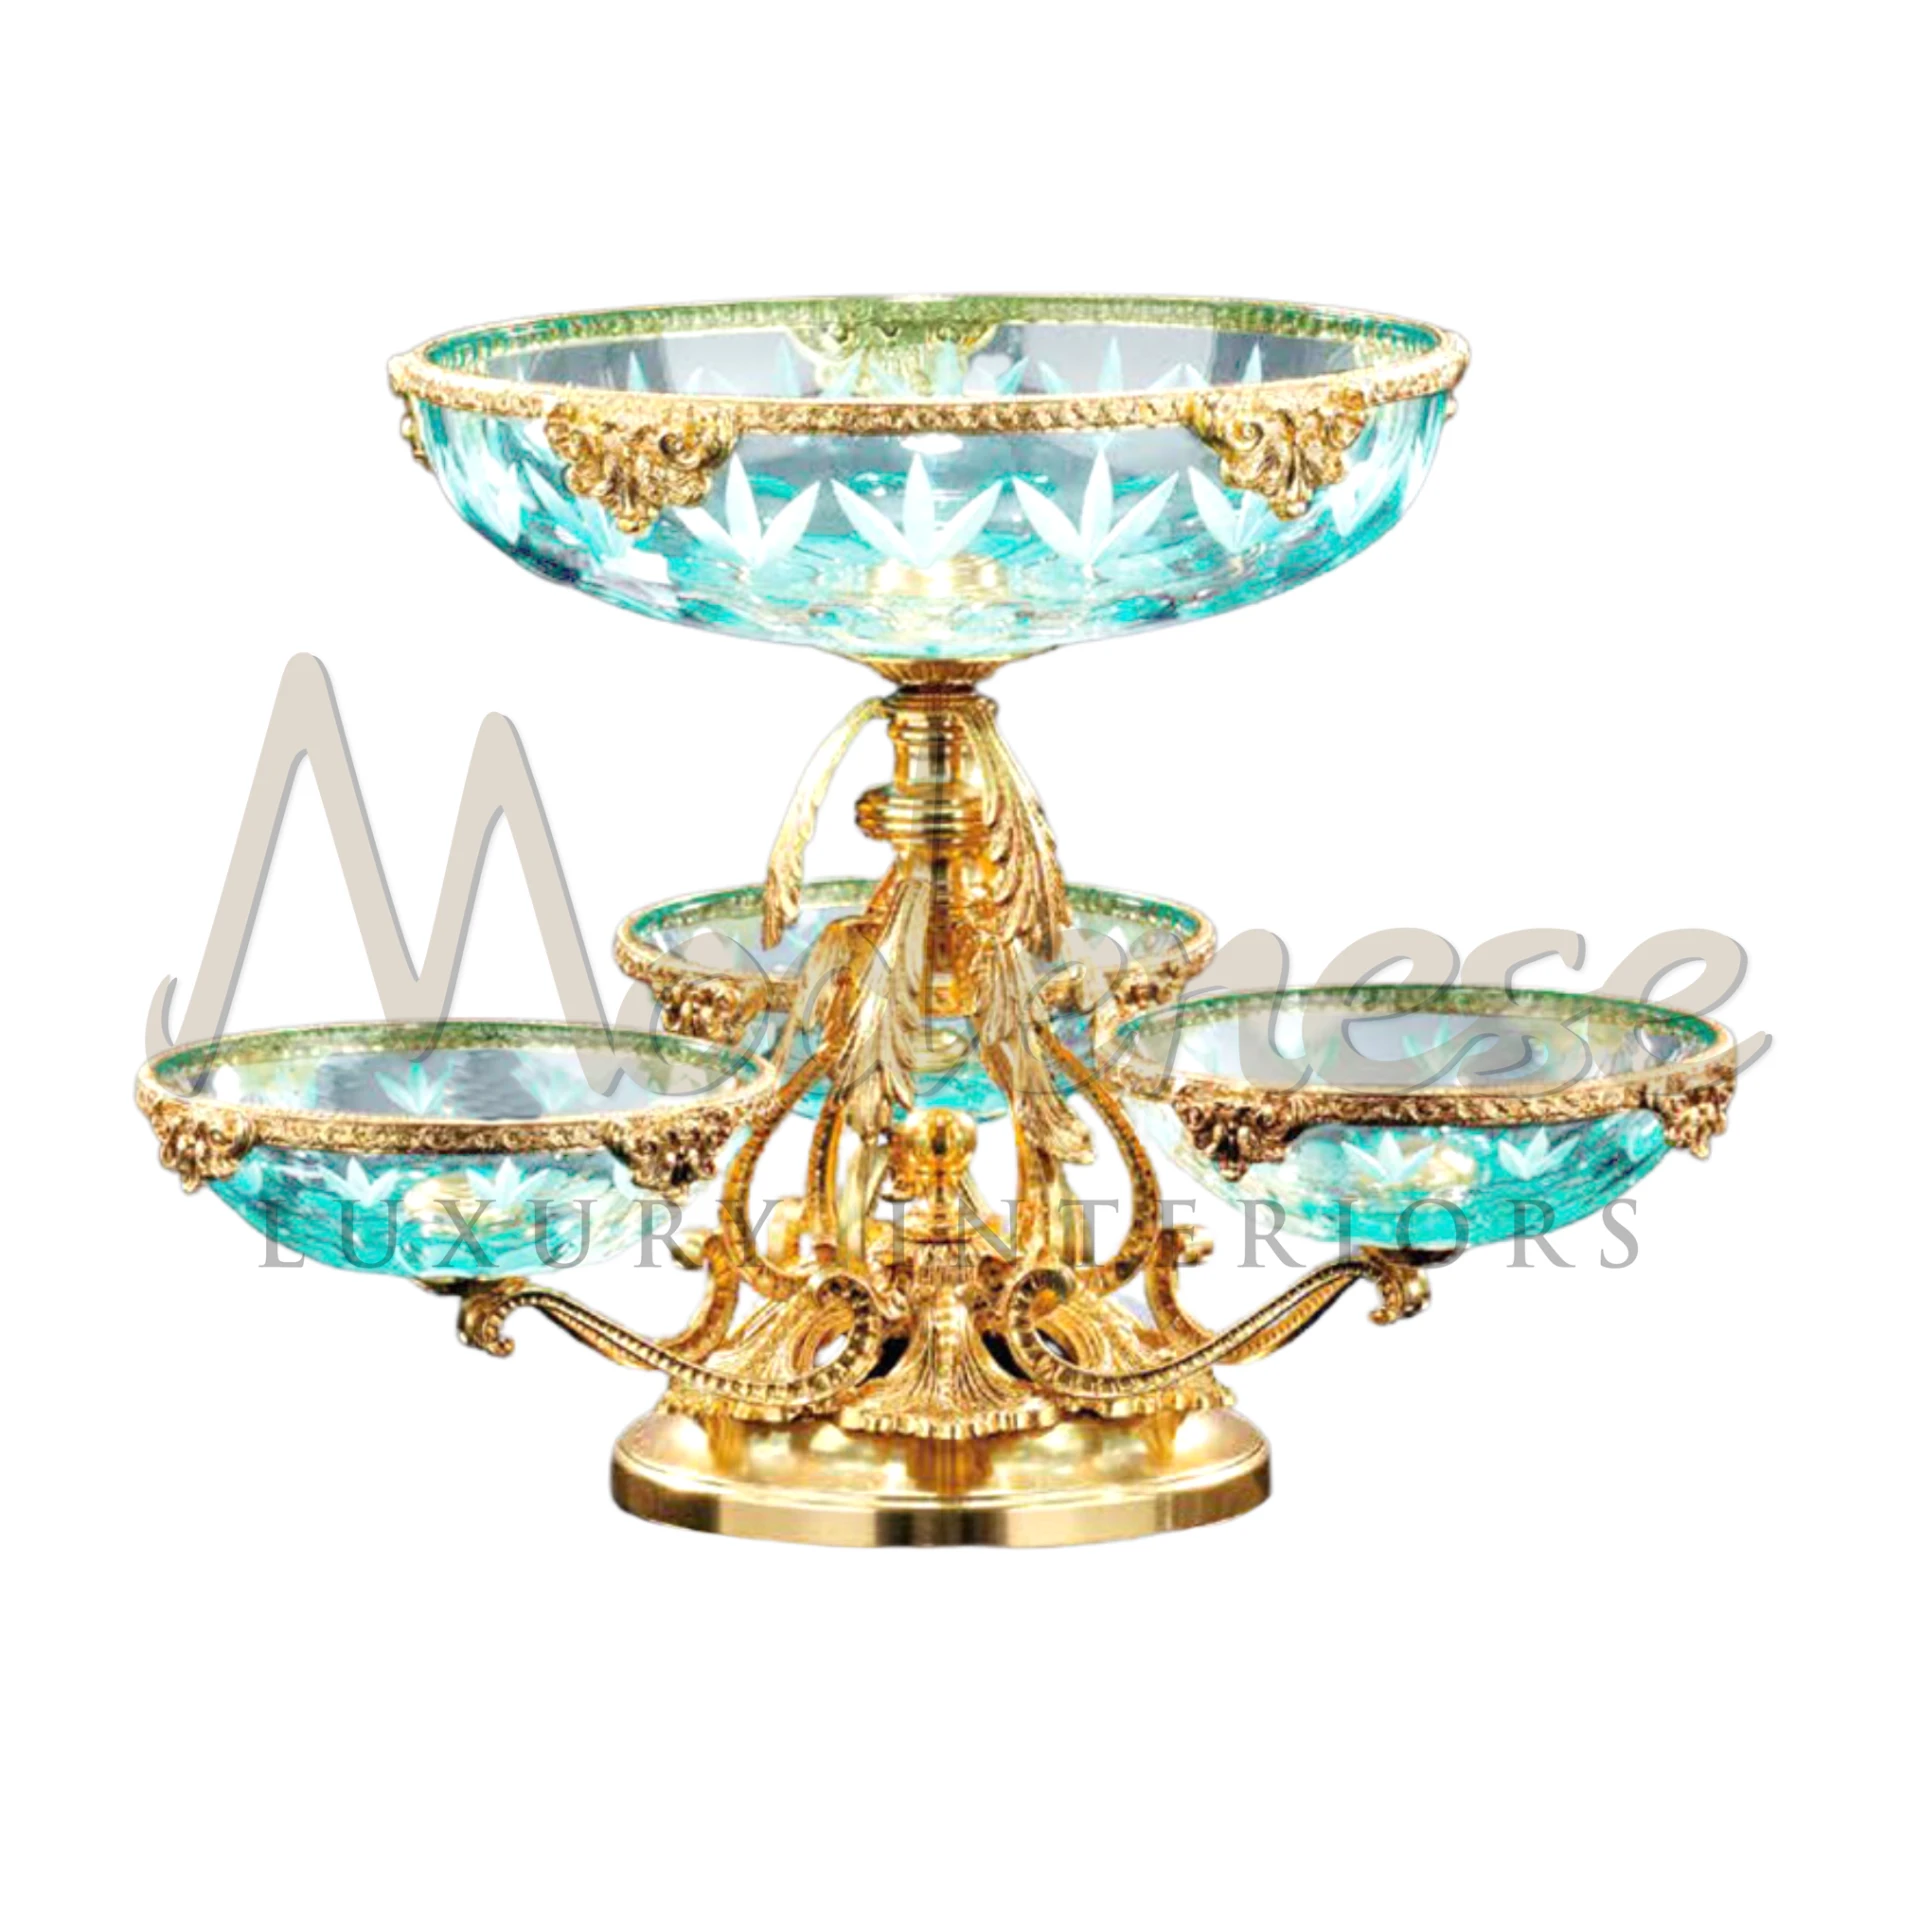 Classical Pedestal Bowl, an elegant and sophisticated piece for luxury interiors, suitable for displaying fruit, flowers, or ornaments in classic or baroque style settings.